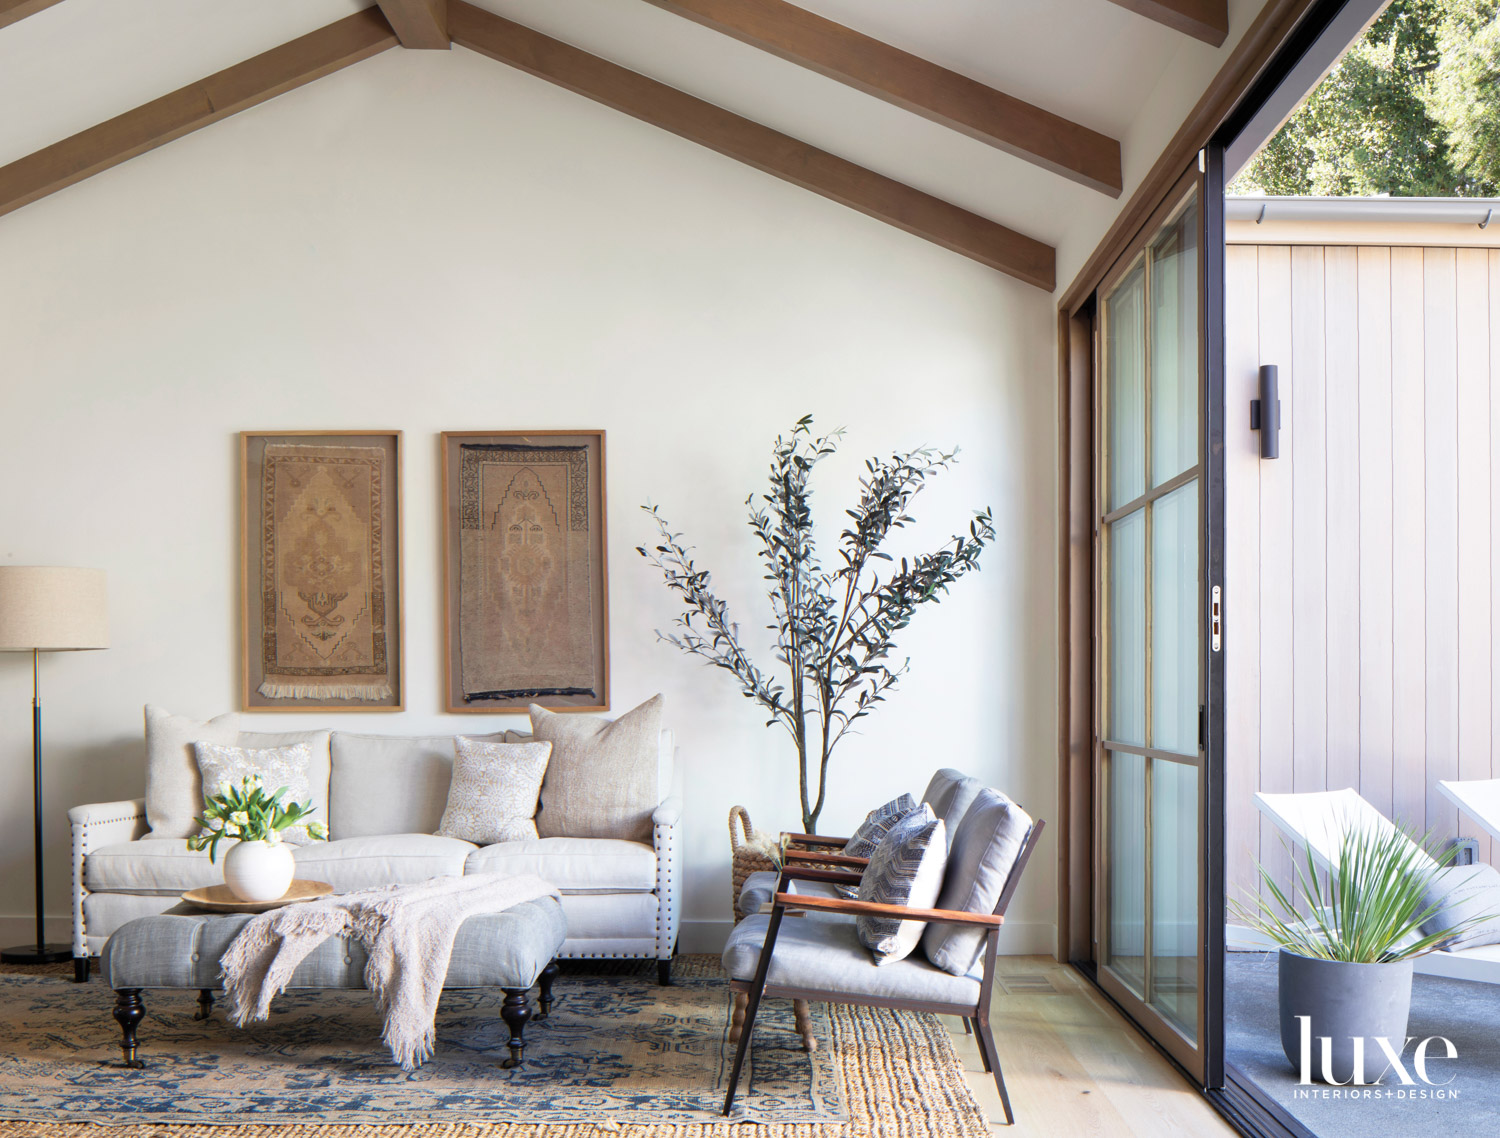 A living room displays a relaxed, California style.